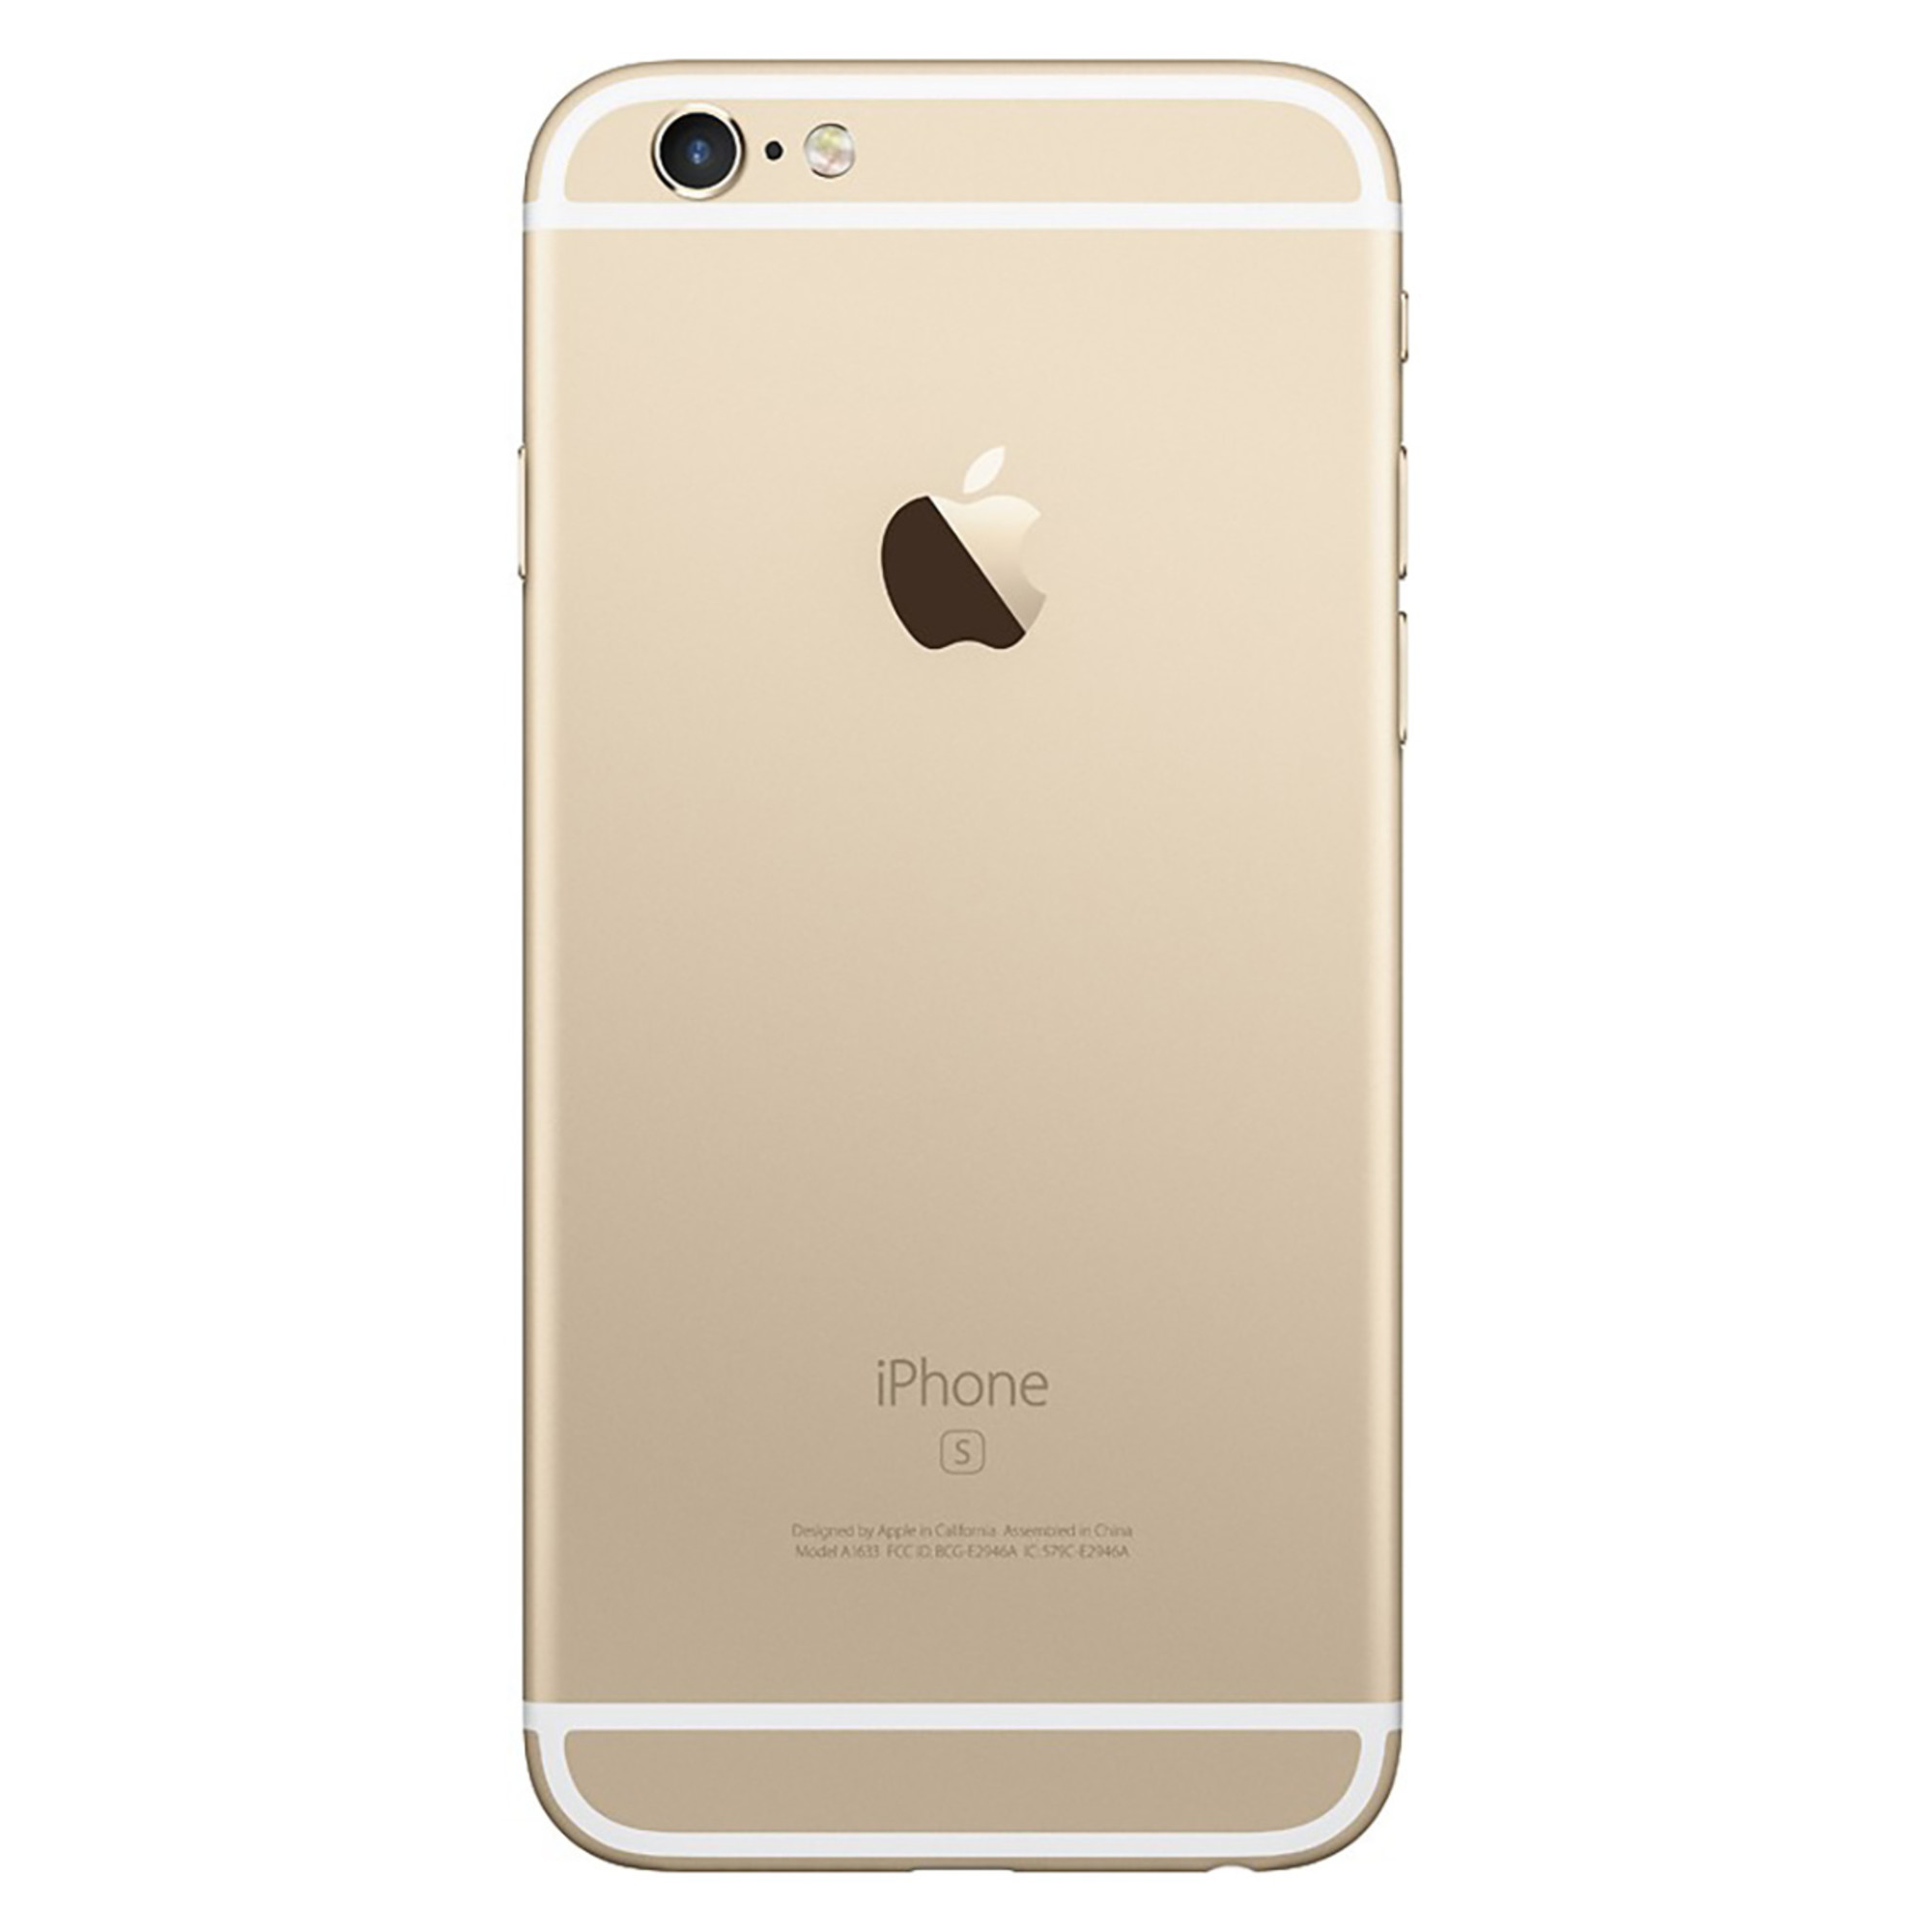 Pre-Owned Apple iPhone 6s 64GB GSM Phone - Gold + WeCare Alcohol Wipes Pack (50 Wipes) - image 5 of 6